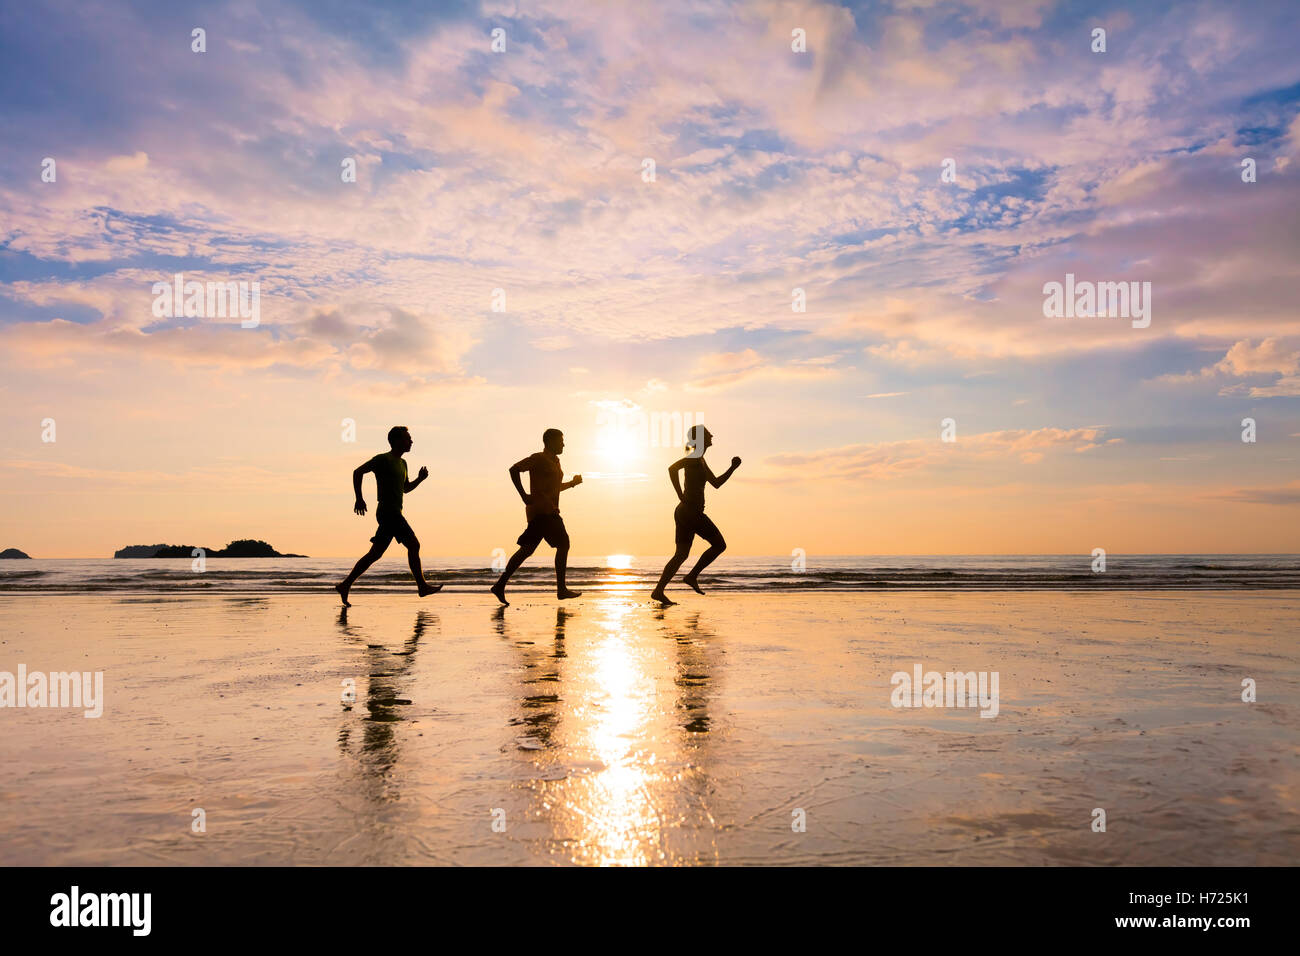 Group of three joggers running on a beach in summer at sunset - concept about healthy sportive lifestyle and community Stock Photo